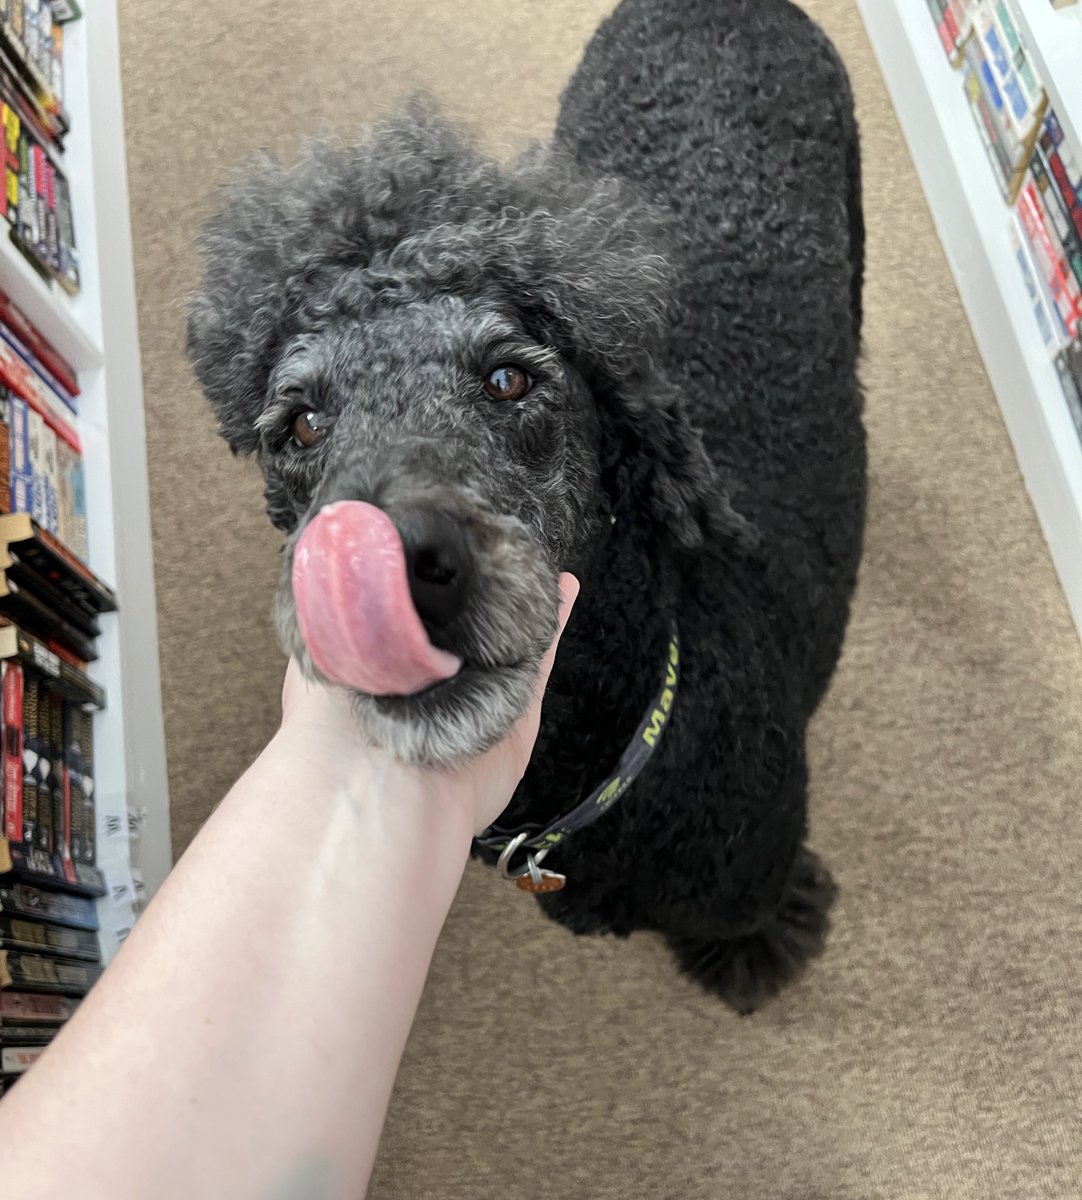 I just walked into a new book store I haven’t been to and a poodle ran up to me AHHH